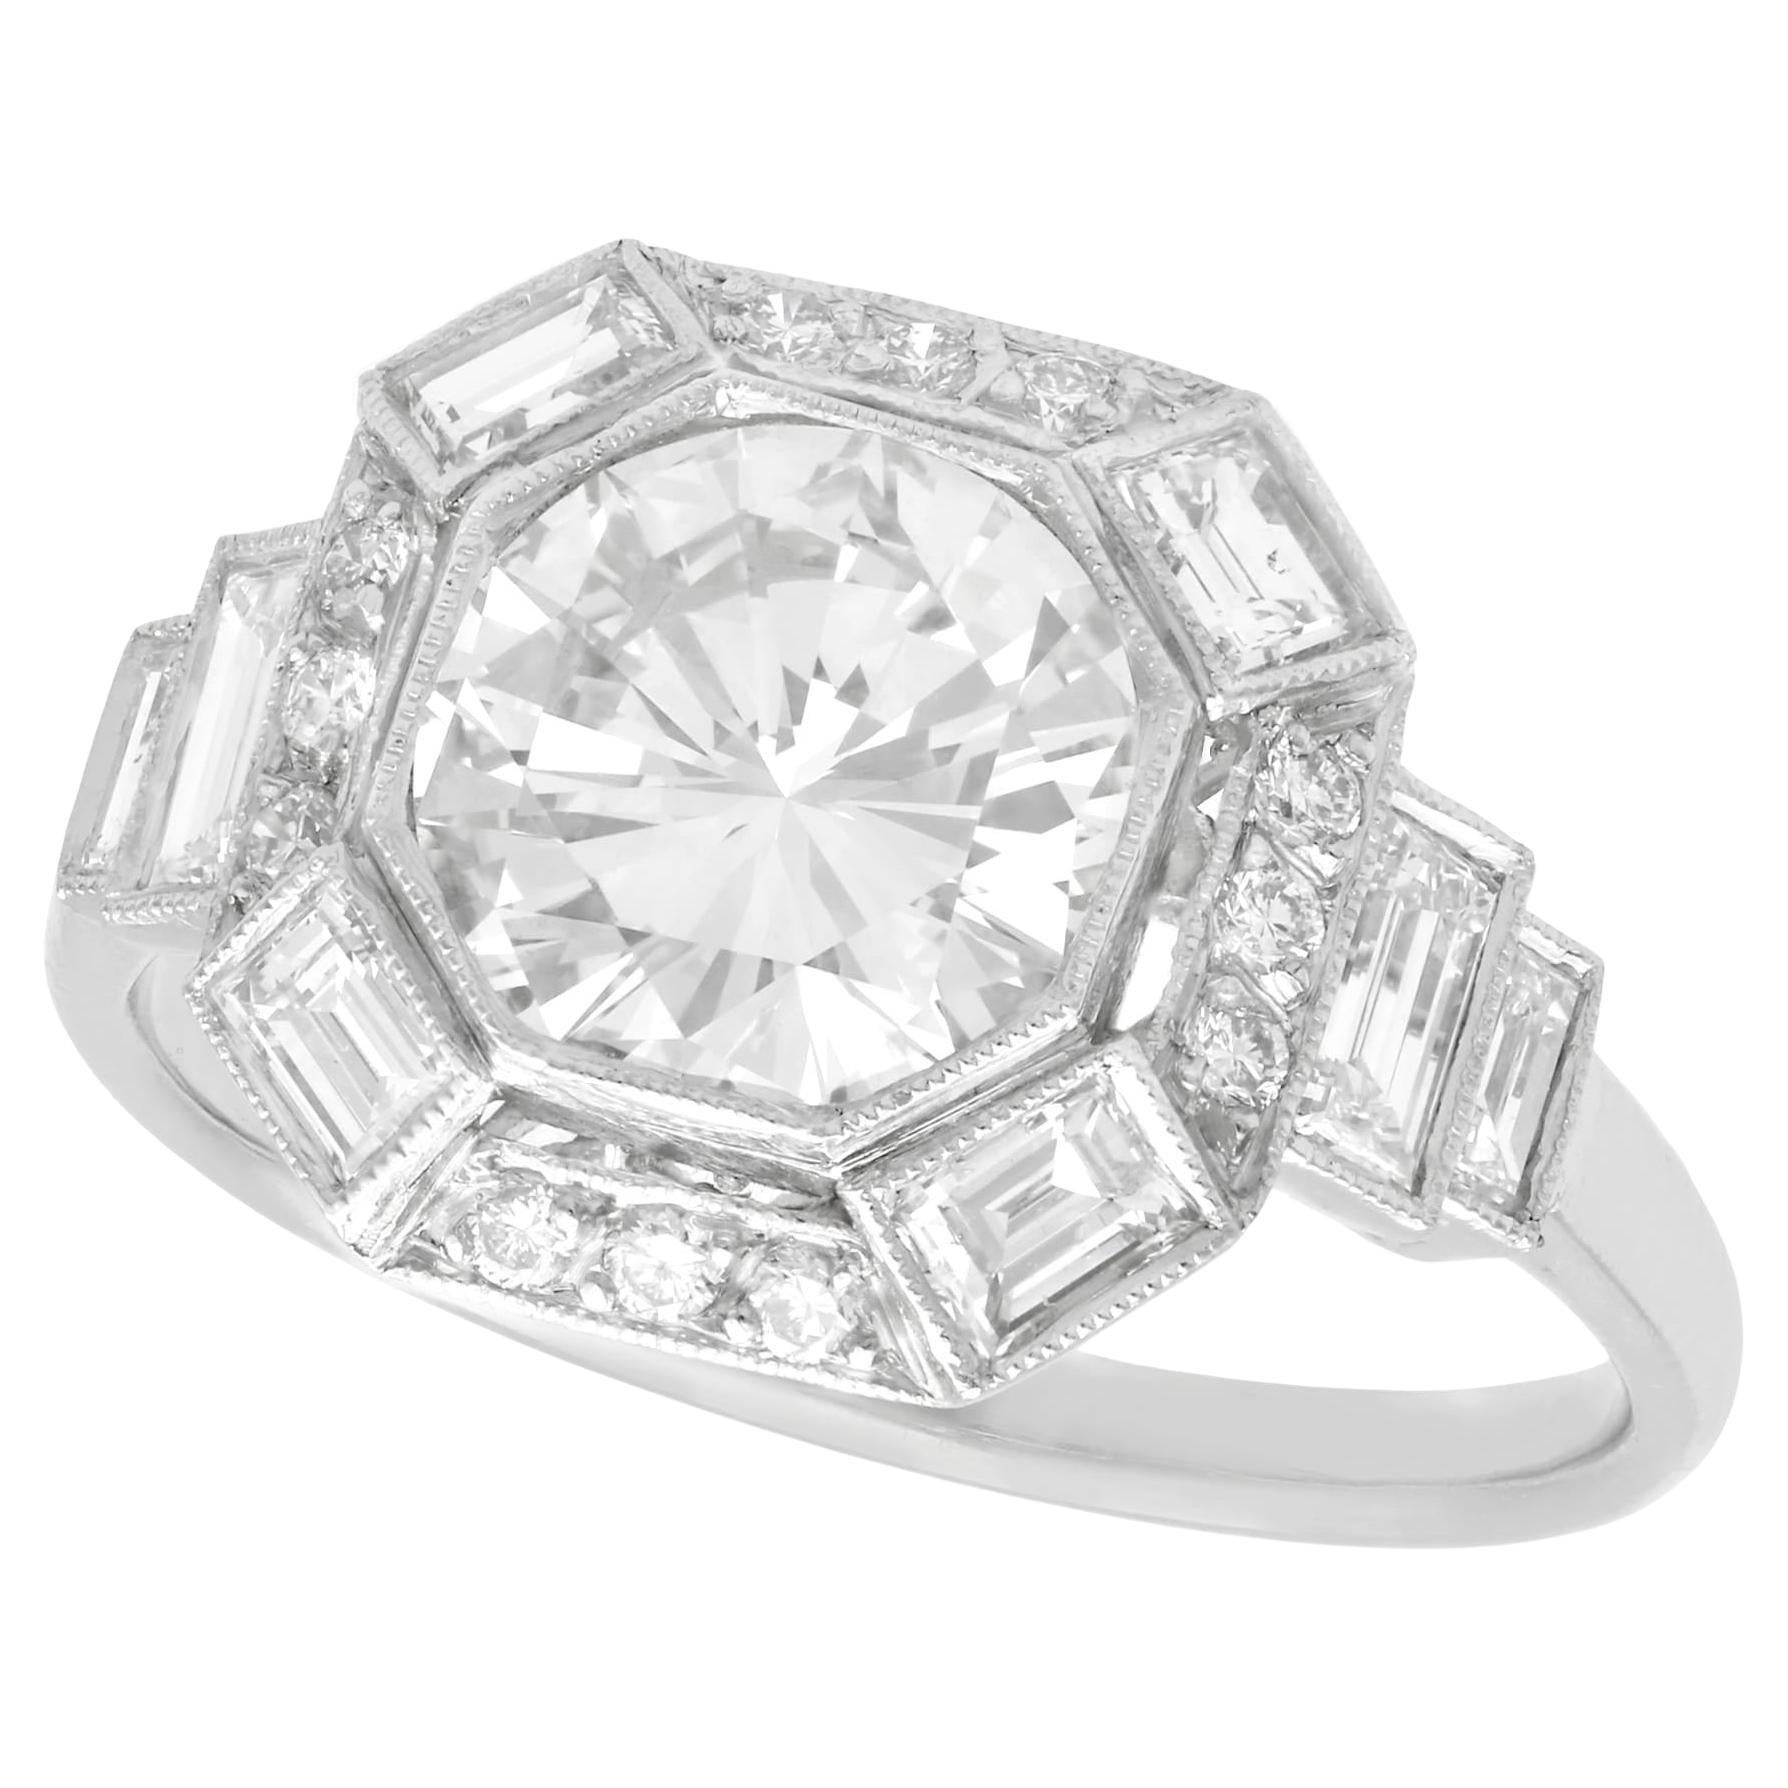 Art Deco Style 2.58 Carat Diamond and Platinum Engagement Ring For Sale